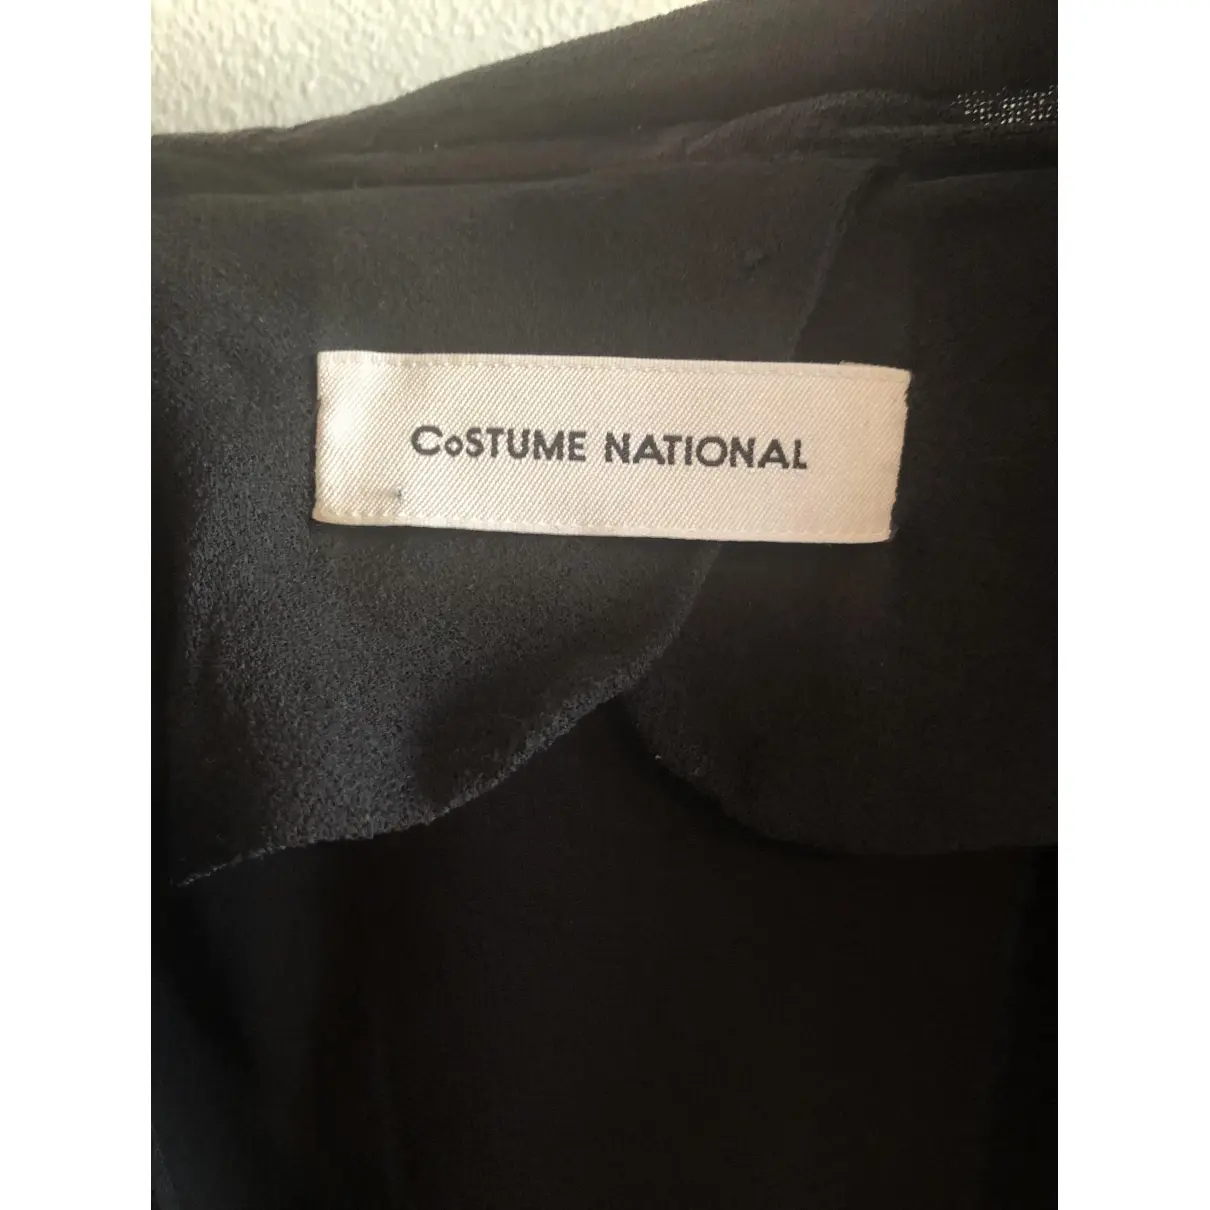 Buy Costume National Wool blouse online